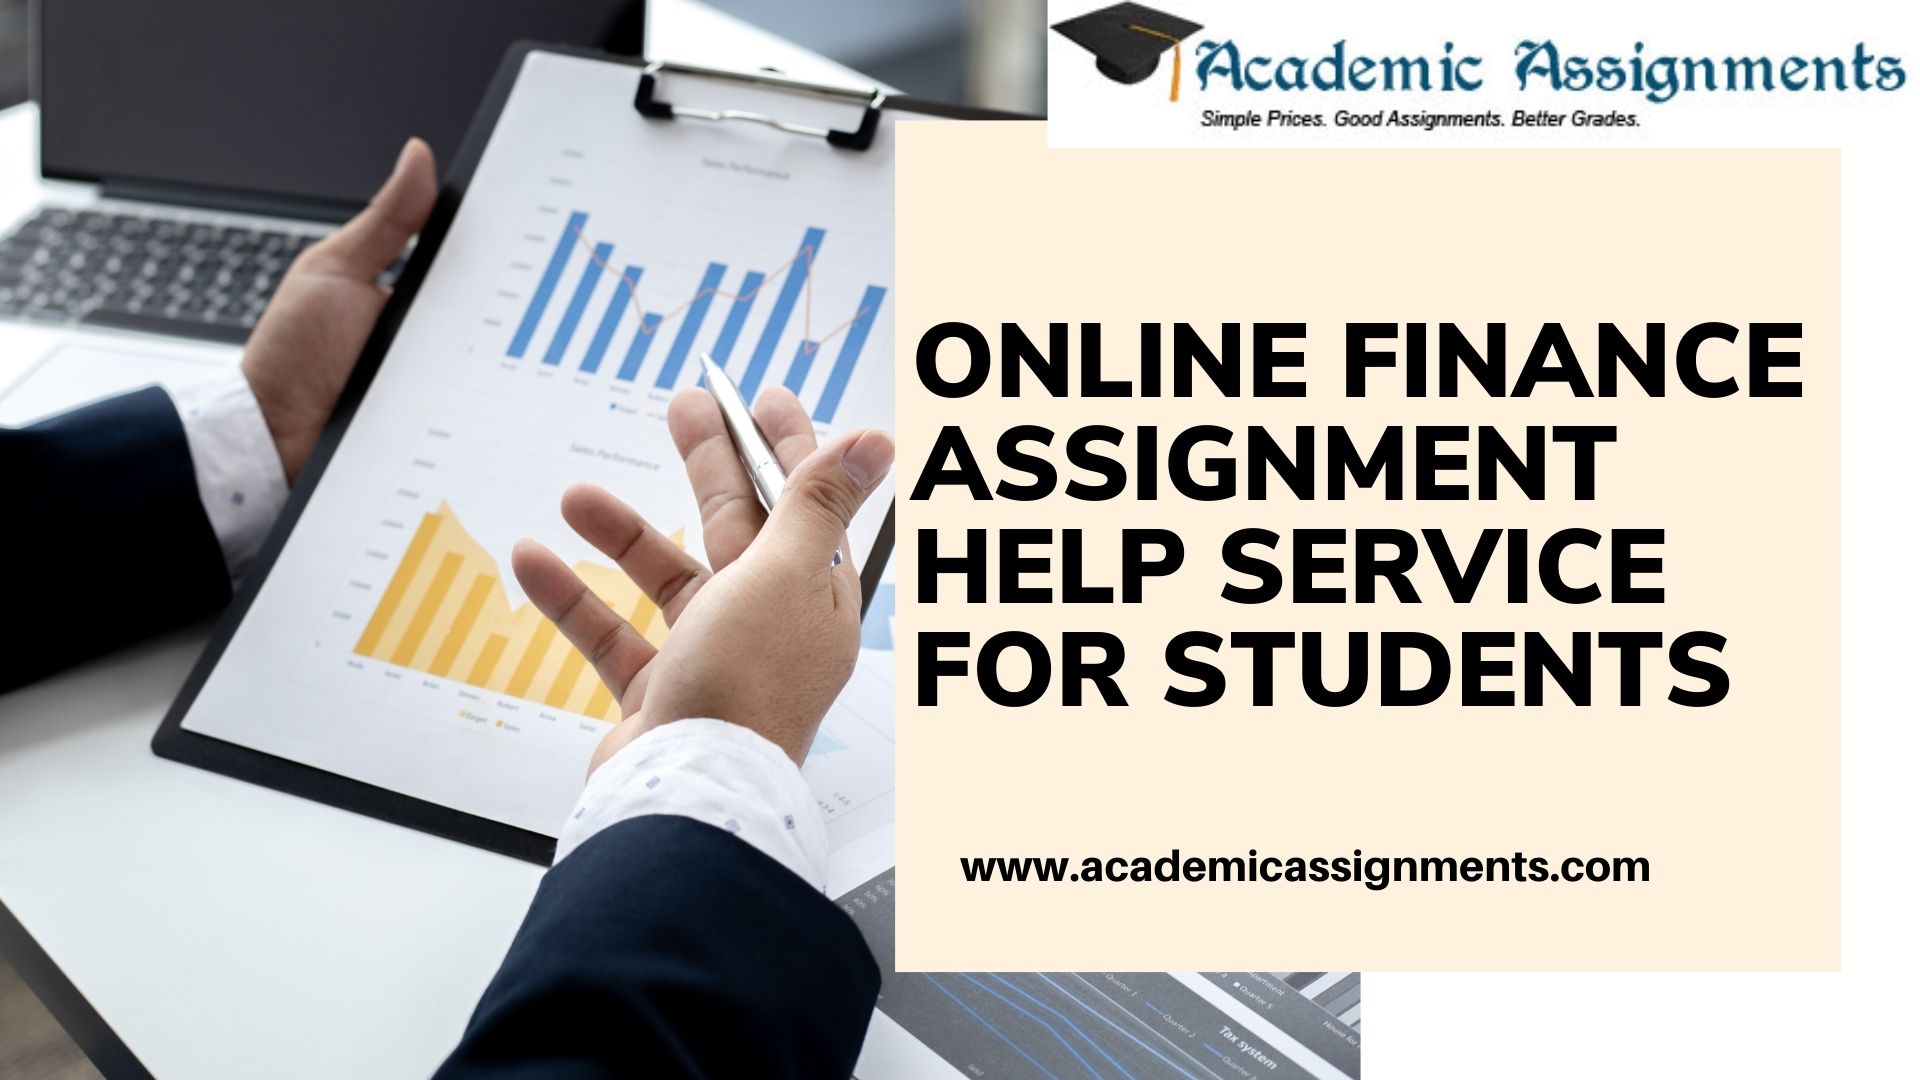 ONLINE FINANCE ASSIGNMENT HELP SERVICE FOR STUDENTS